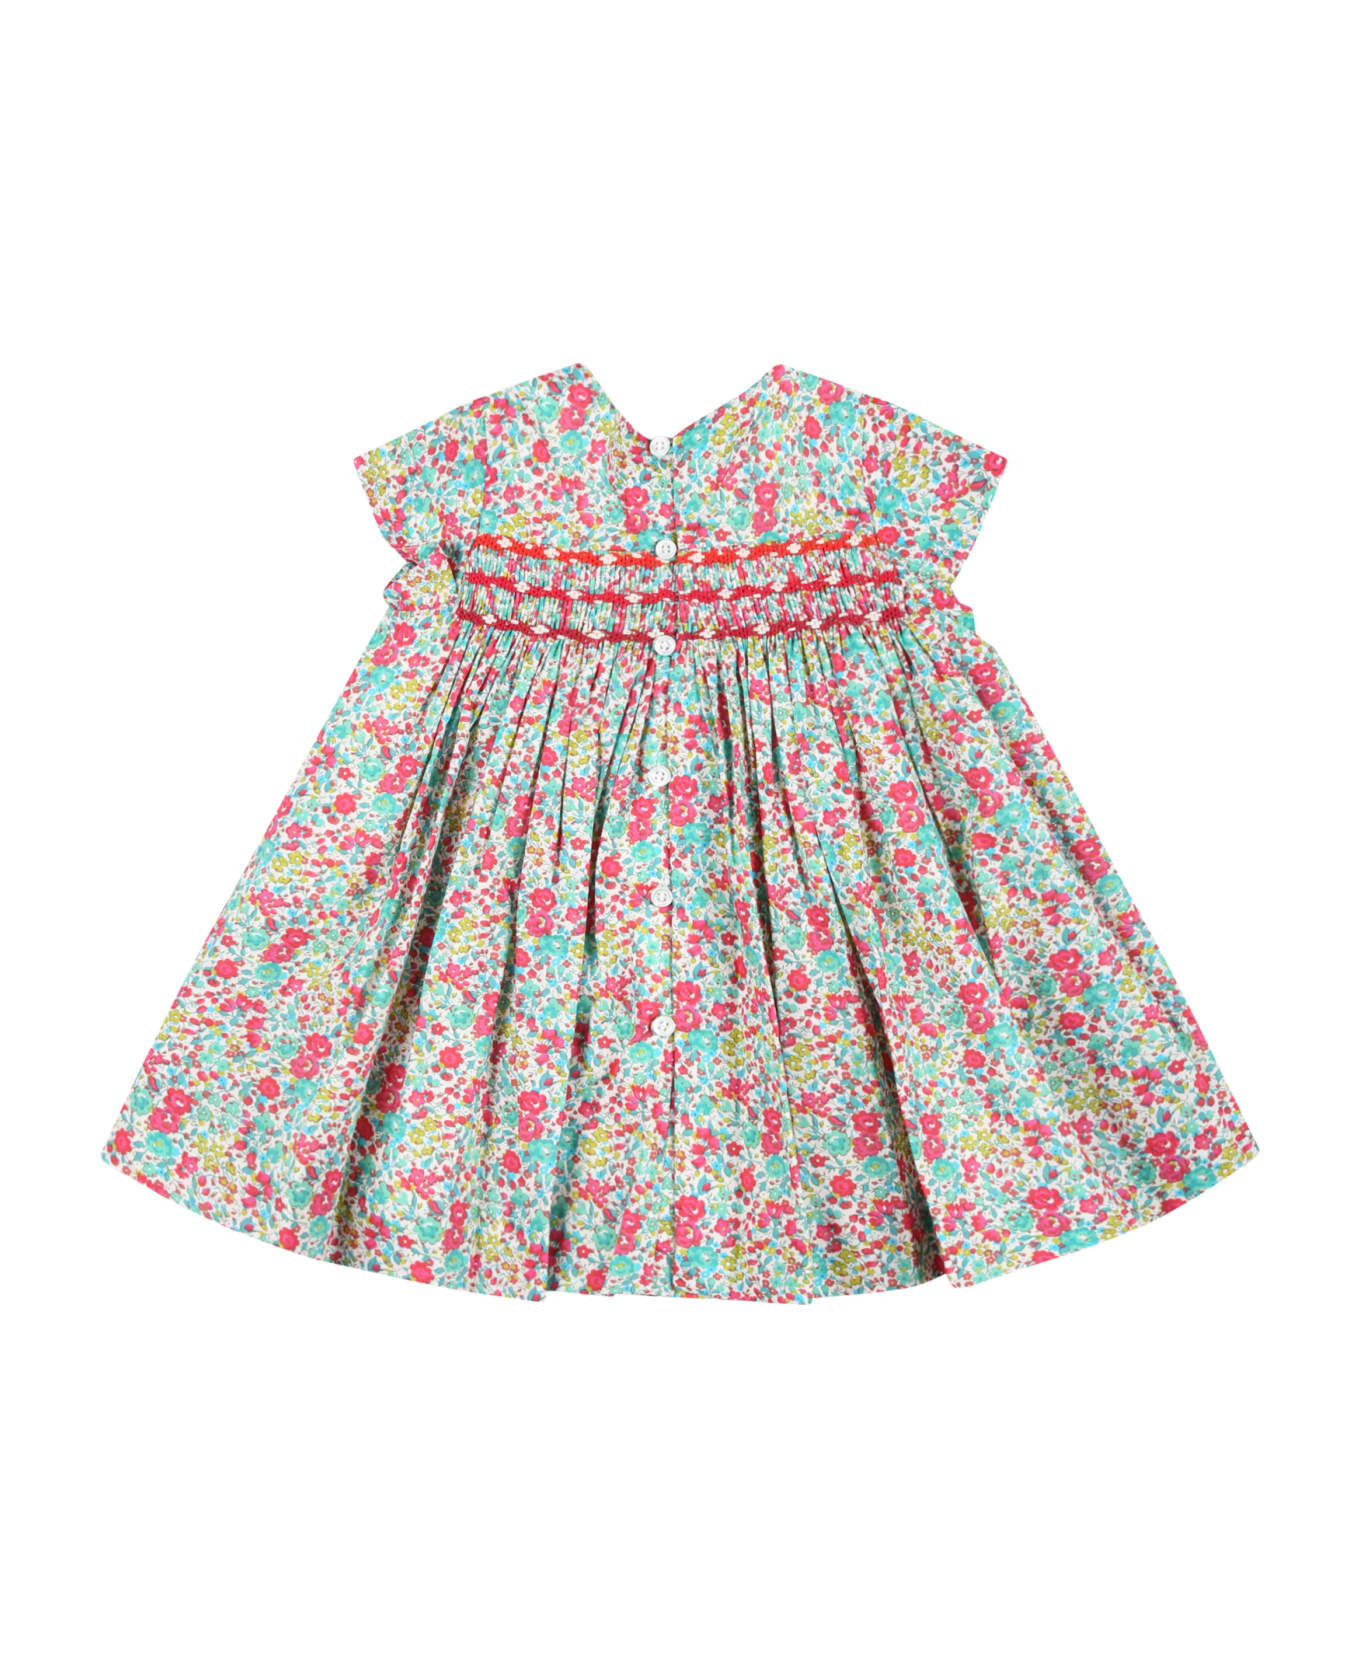 Bonpoint Multicolor Dress For Baby Girl With Liberty Print - Multicolor ウェア